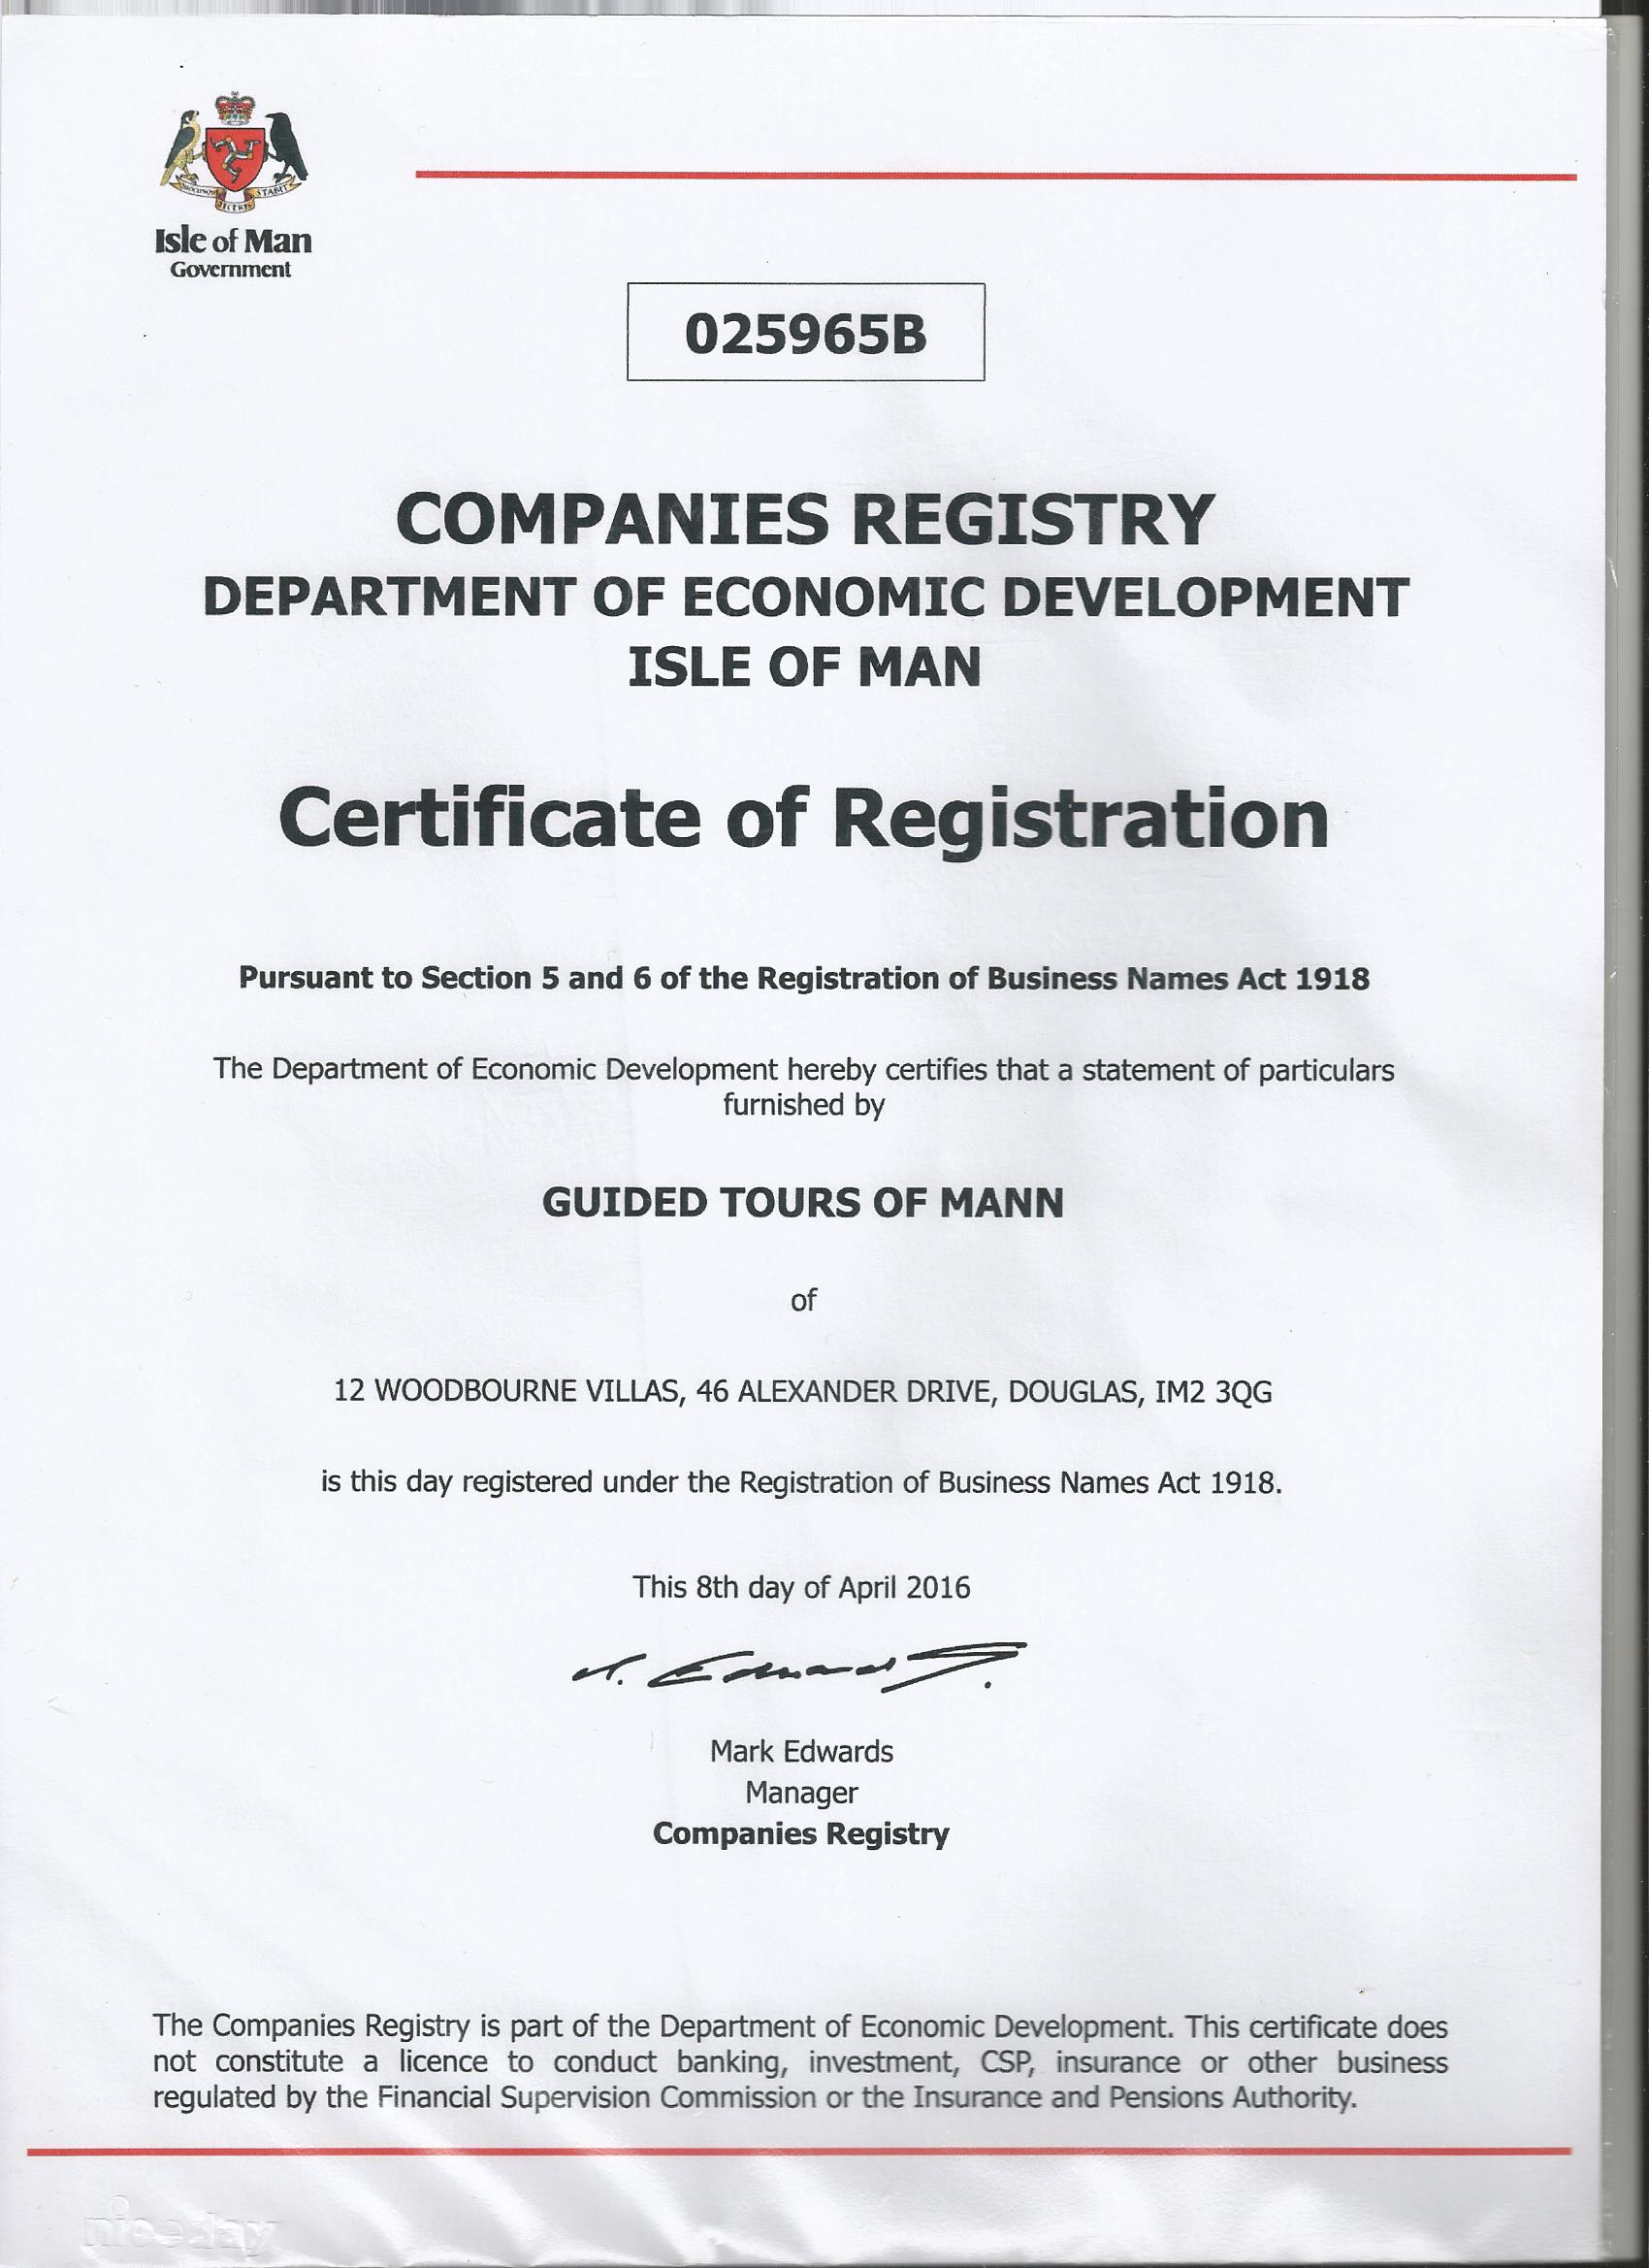 CERTIFICATE OF REGISTRATION Guided Tours of Mann